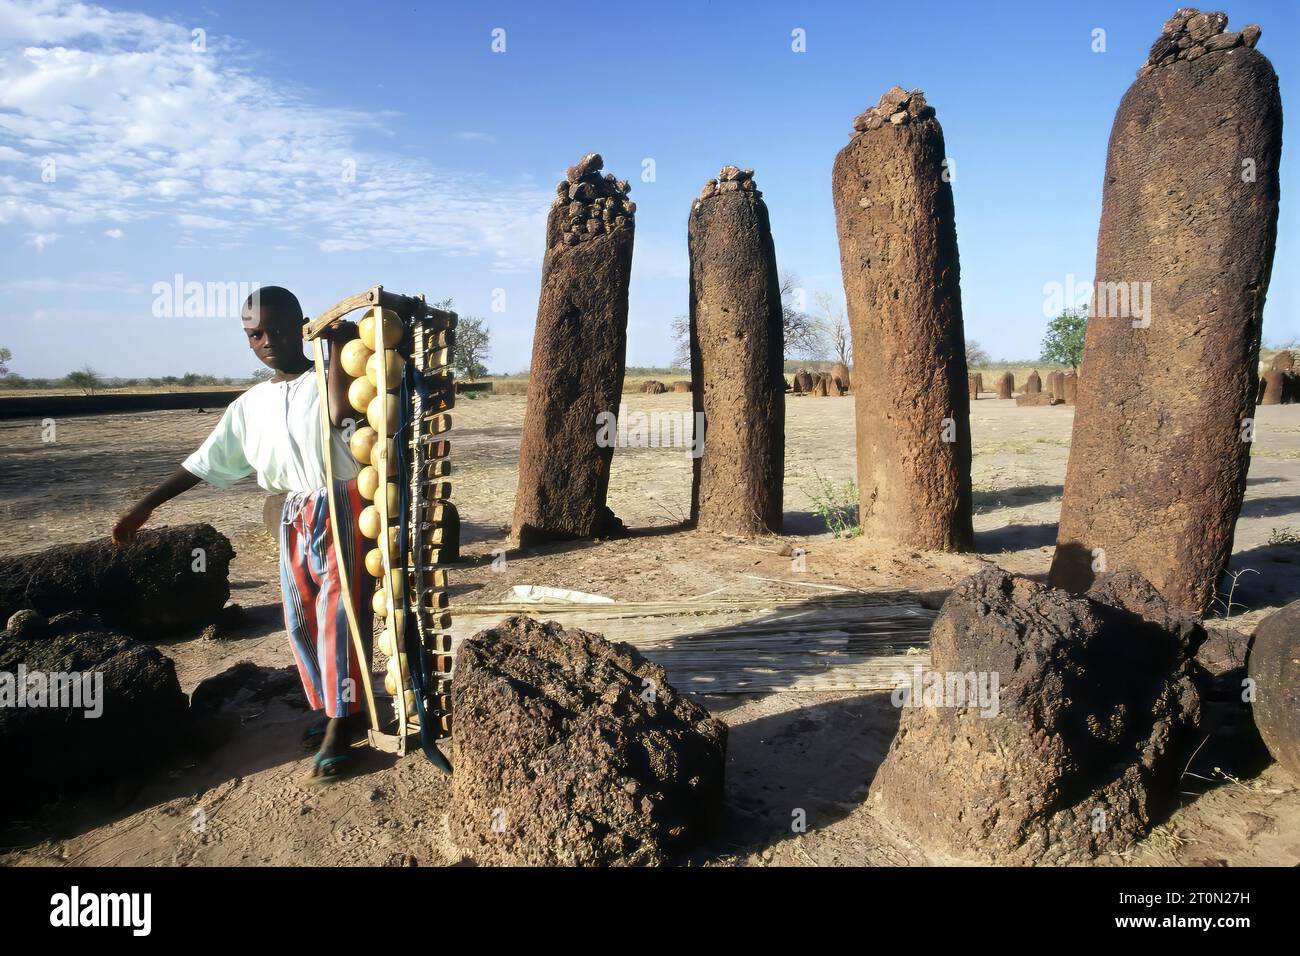 A boy carries an traditional balafon music instrument at the Wassu Stone Circles, UNESCO World Heritage Site, the Gambia, Africa Stock Photo